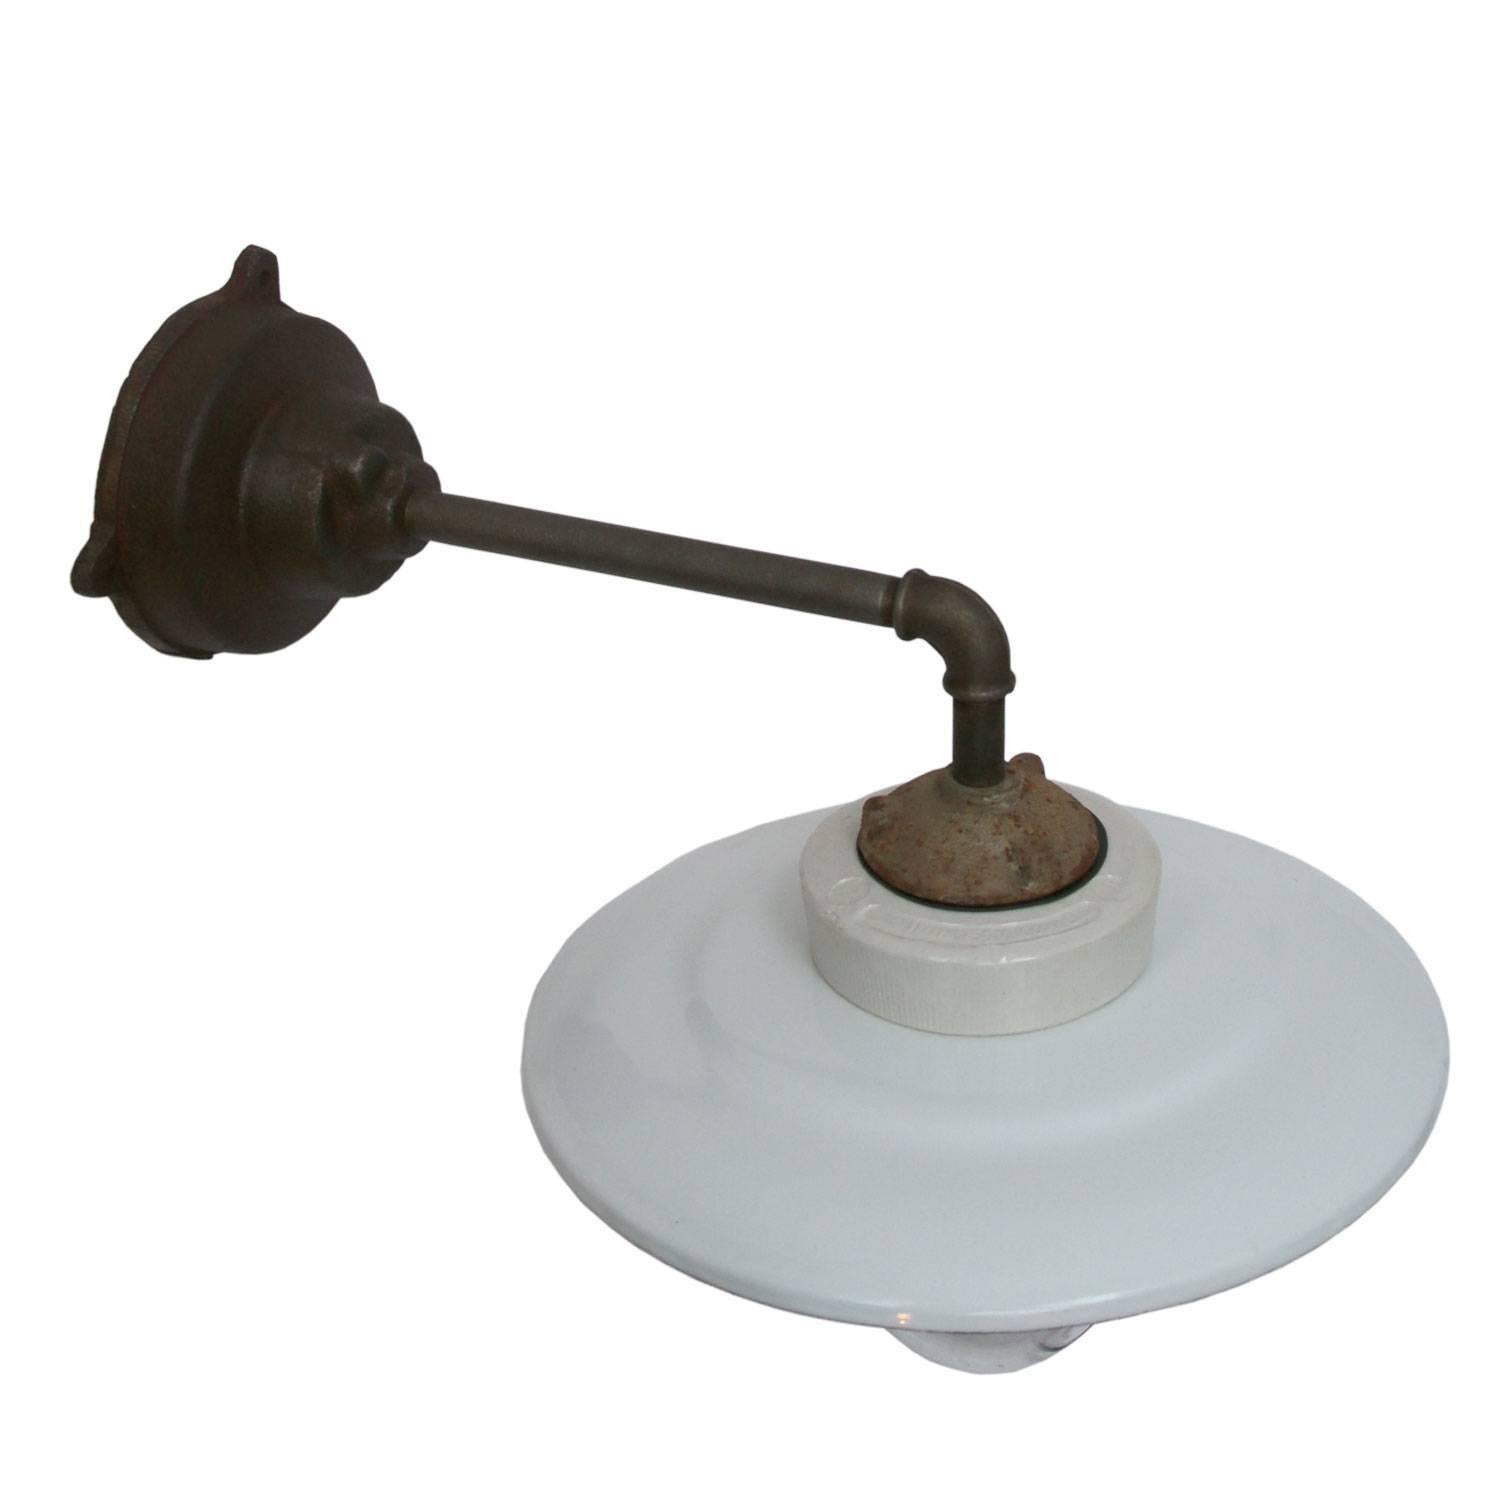 muran porcelain. White enamel Industrial wall light with porcelain top. Clear glass, diameter cast iron wall piece: 13 cm, 3 holes to secure.

Weight: 3.7 kg / 8.2 lb.

All lamps have been made suitable by international standards for incandescent